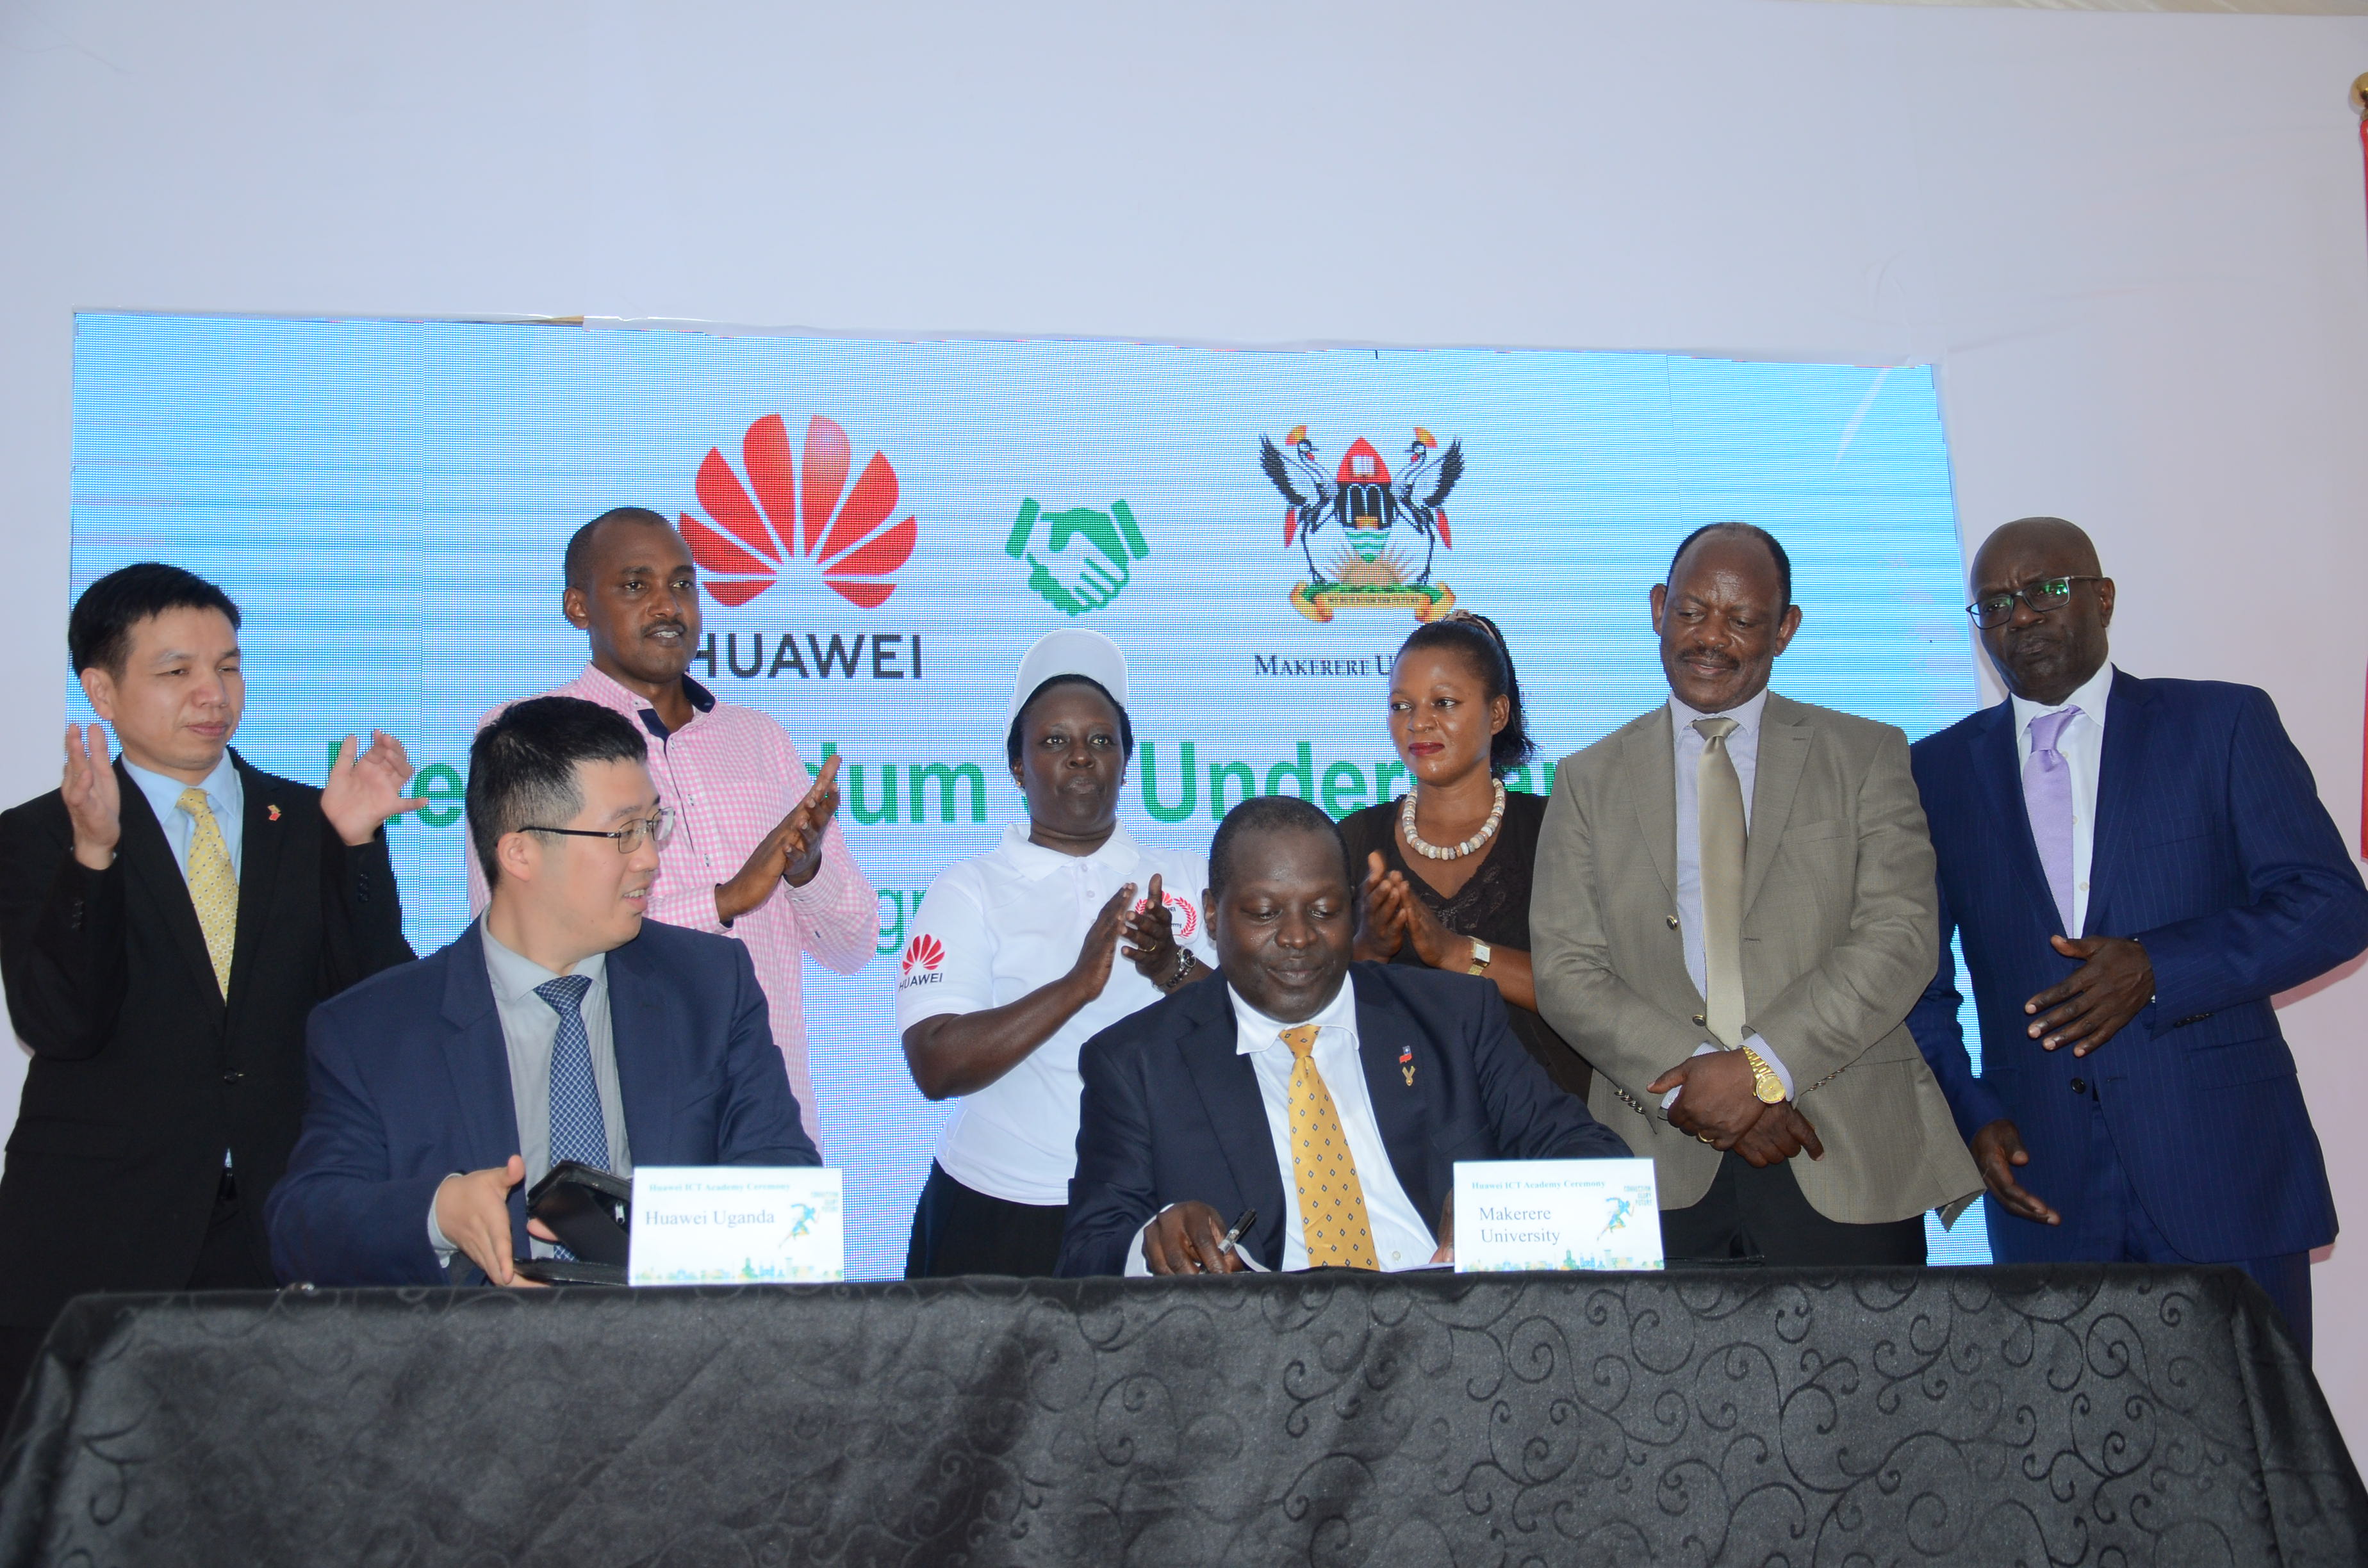 Huawei MD Liujiawei (L) and College of computing principal Prof. Tonny Oyana(R) sign MOU To Establish the Huawei ICT Academy in Makerere University